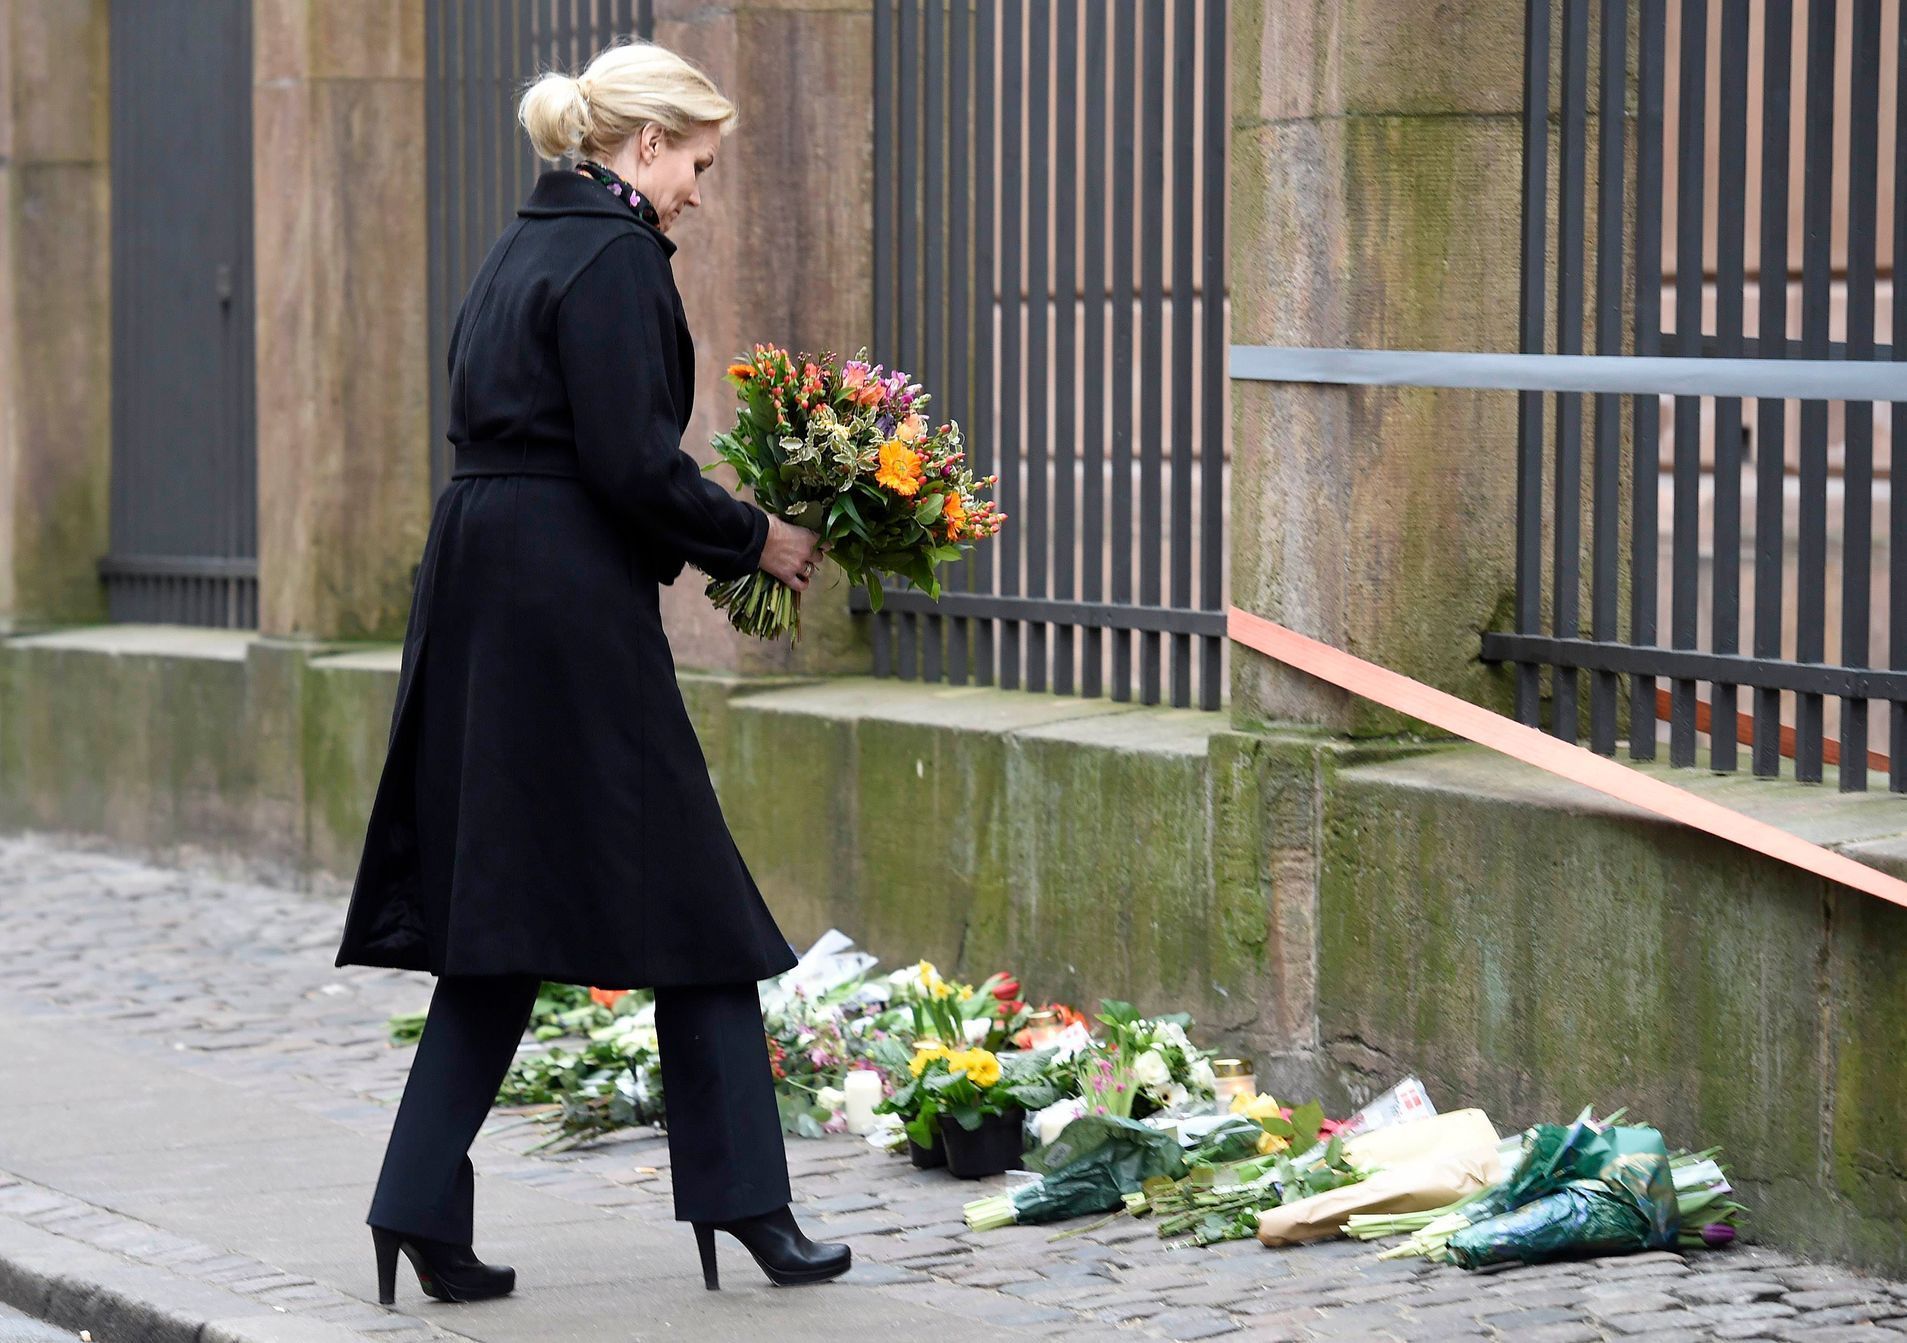 Danish PM Thorning-Schmidt places flowers in front of the synagogue in Krystalgade in Copenhagen